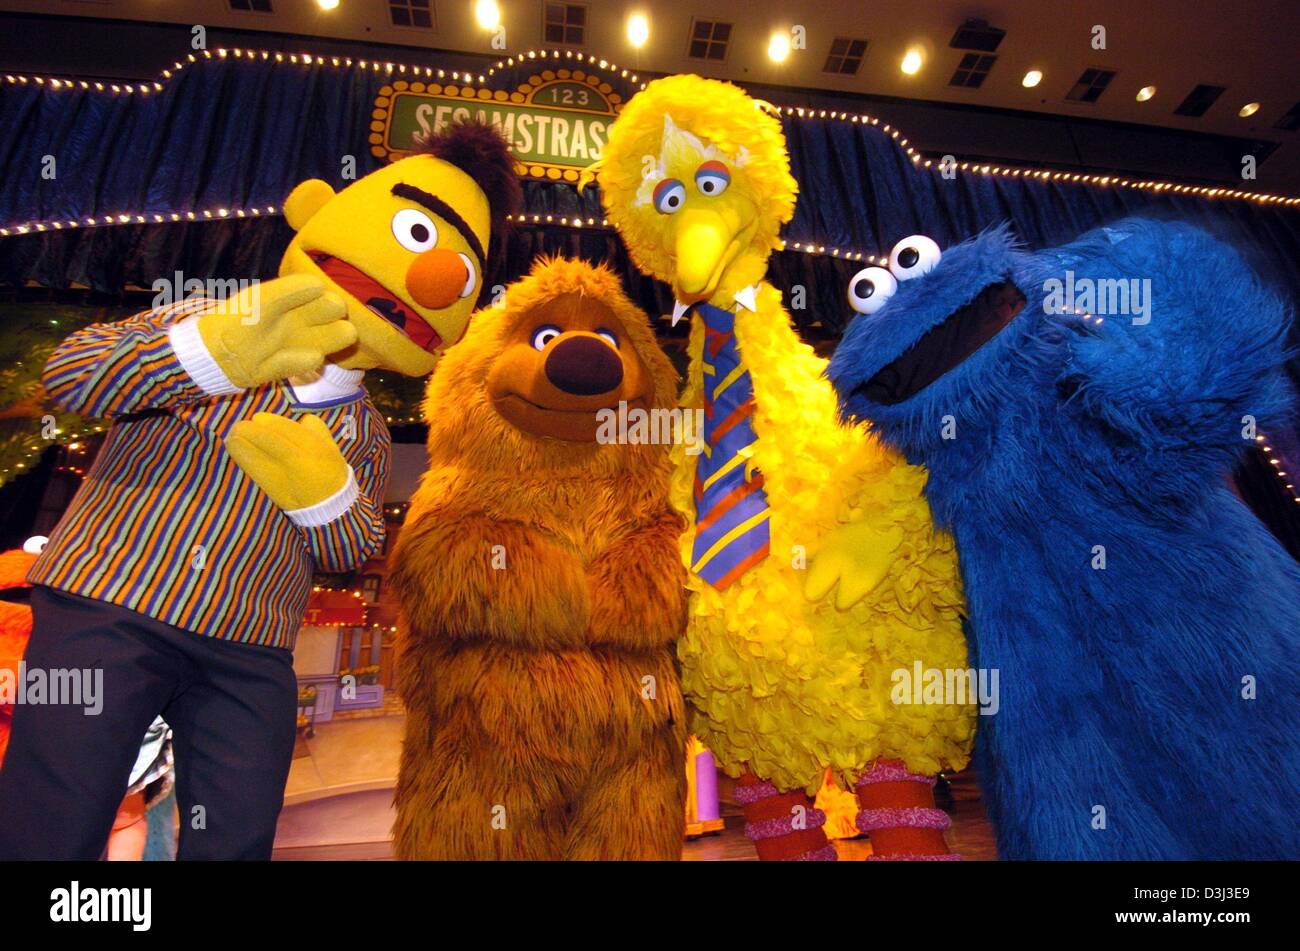 (dpa) - From L: Bert, Samson, Fibo and the cookie monster of the 'Sesame Street' ('Sesamstrasse') answers journalists' questions during a press conference in Hamburg, 8 January 2004. Together with other muppets from the TV show they will tour Germany with the live musical 'Sei mein Freund' (be my friend), making station stops in about 40 cities. Stock Photo